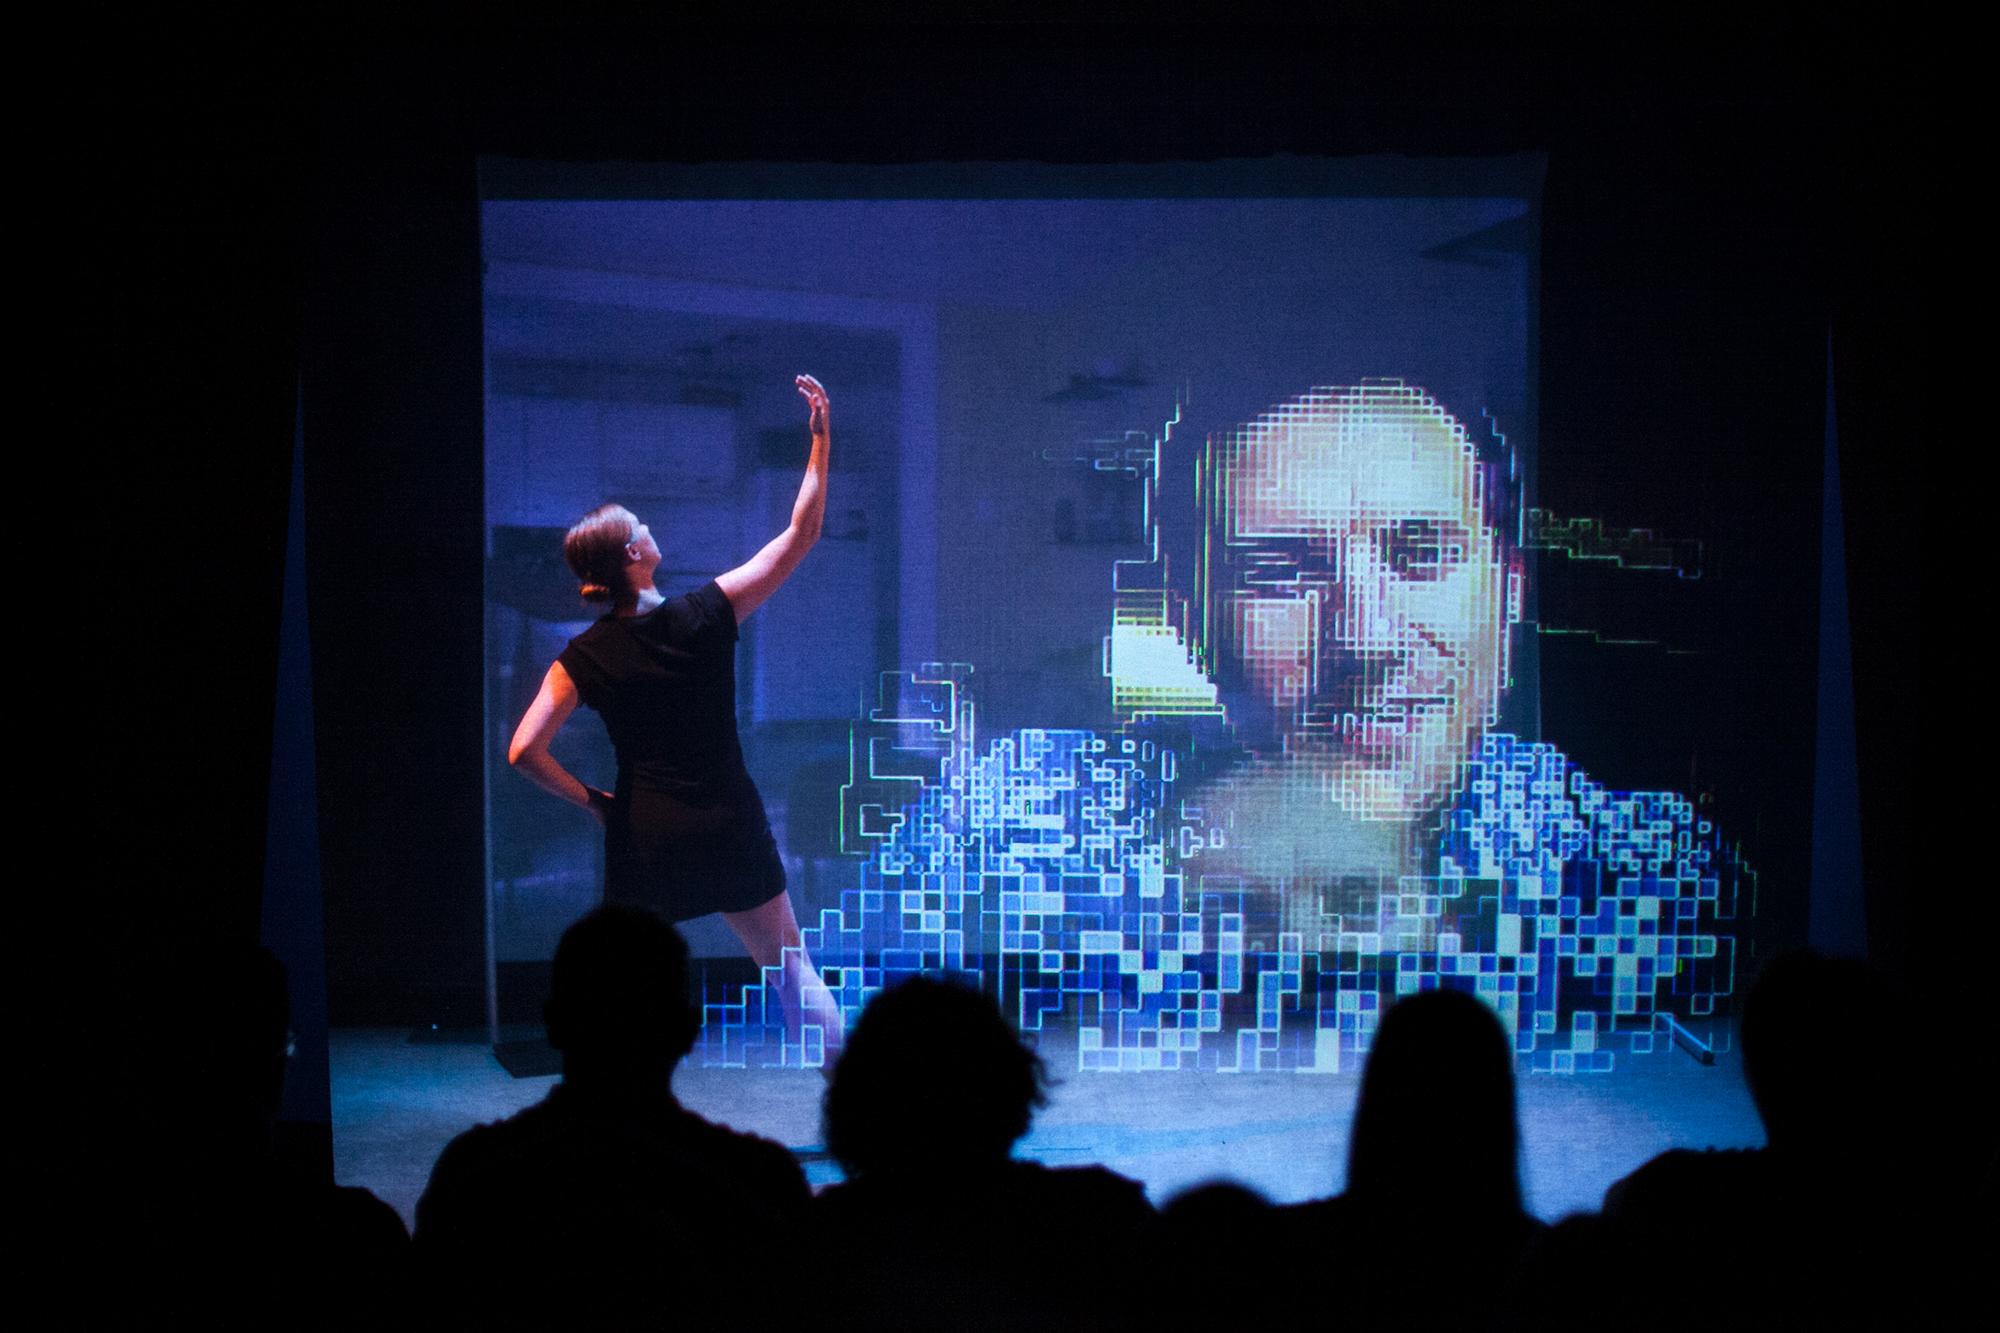 man's face projected on screen and woman in front